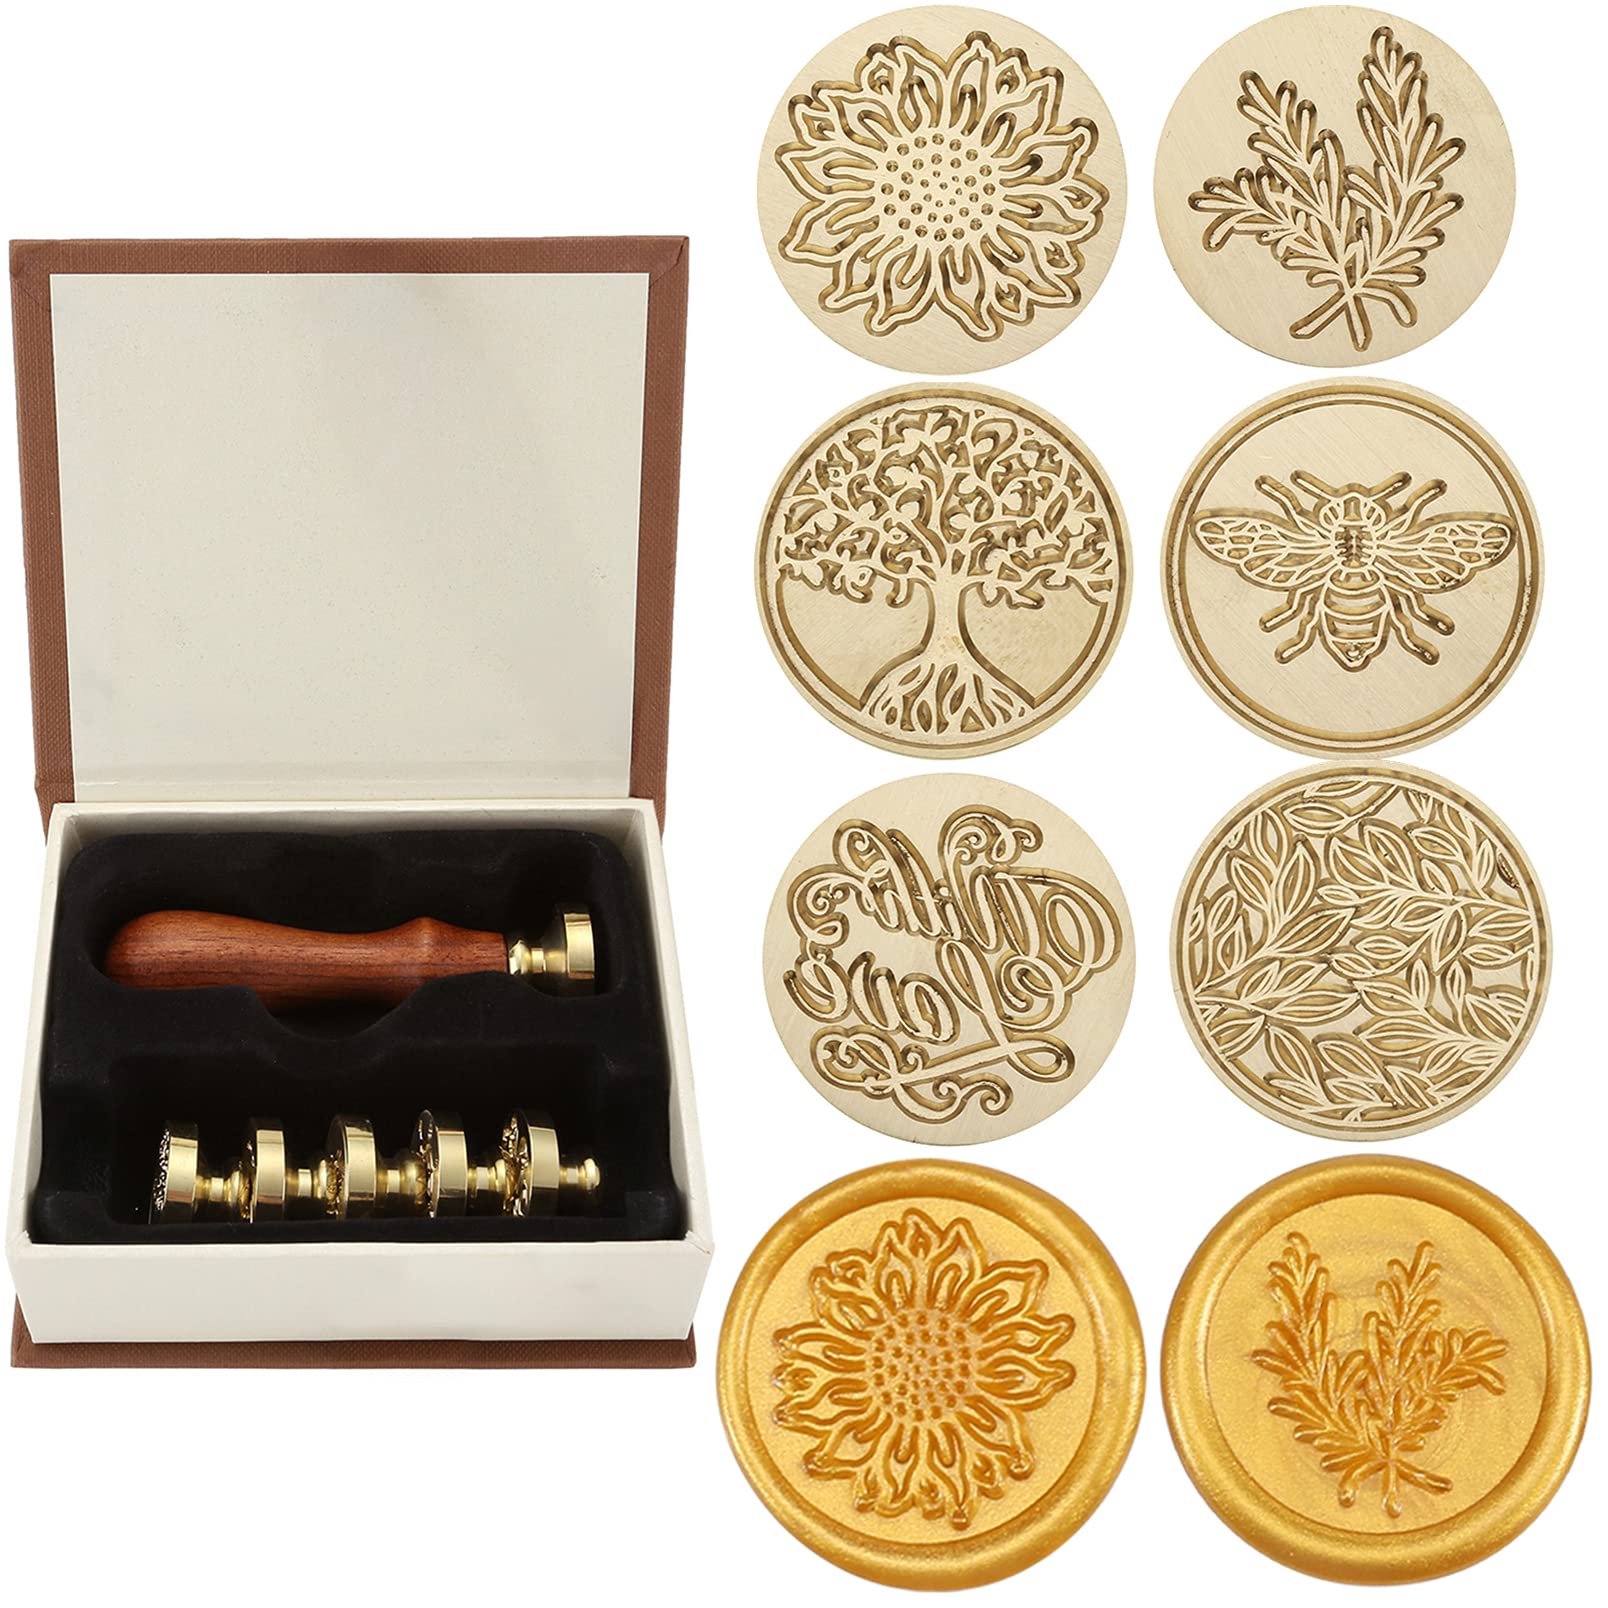 Wax Seal Stamp Set,Yoption 6 Pieces Plant Series Sealing Wax Stamp Heads +  1 Wooden Hilt, Vintage Seal Wax Stamp Kit with Gift Box (Sunflower+Tree of